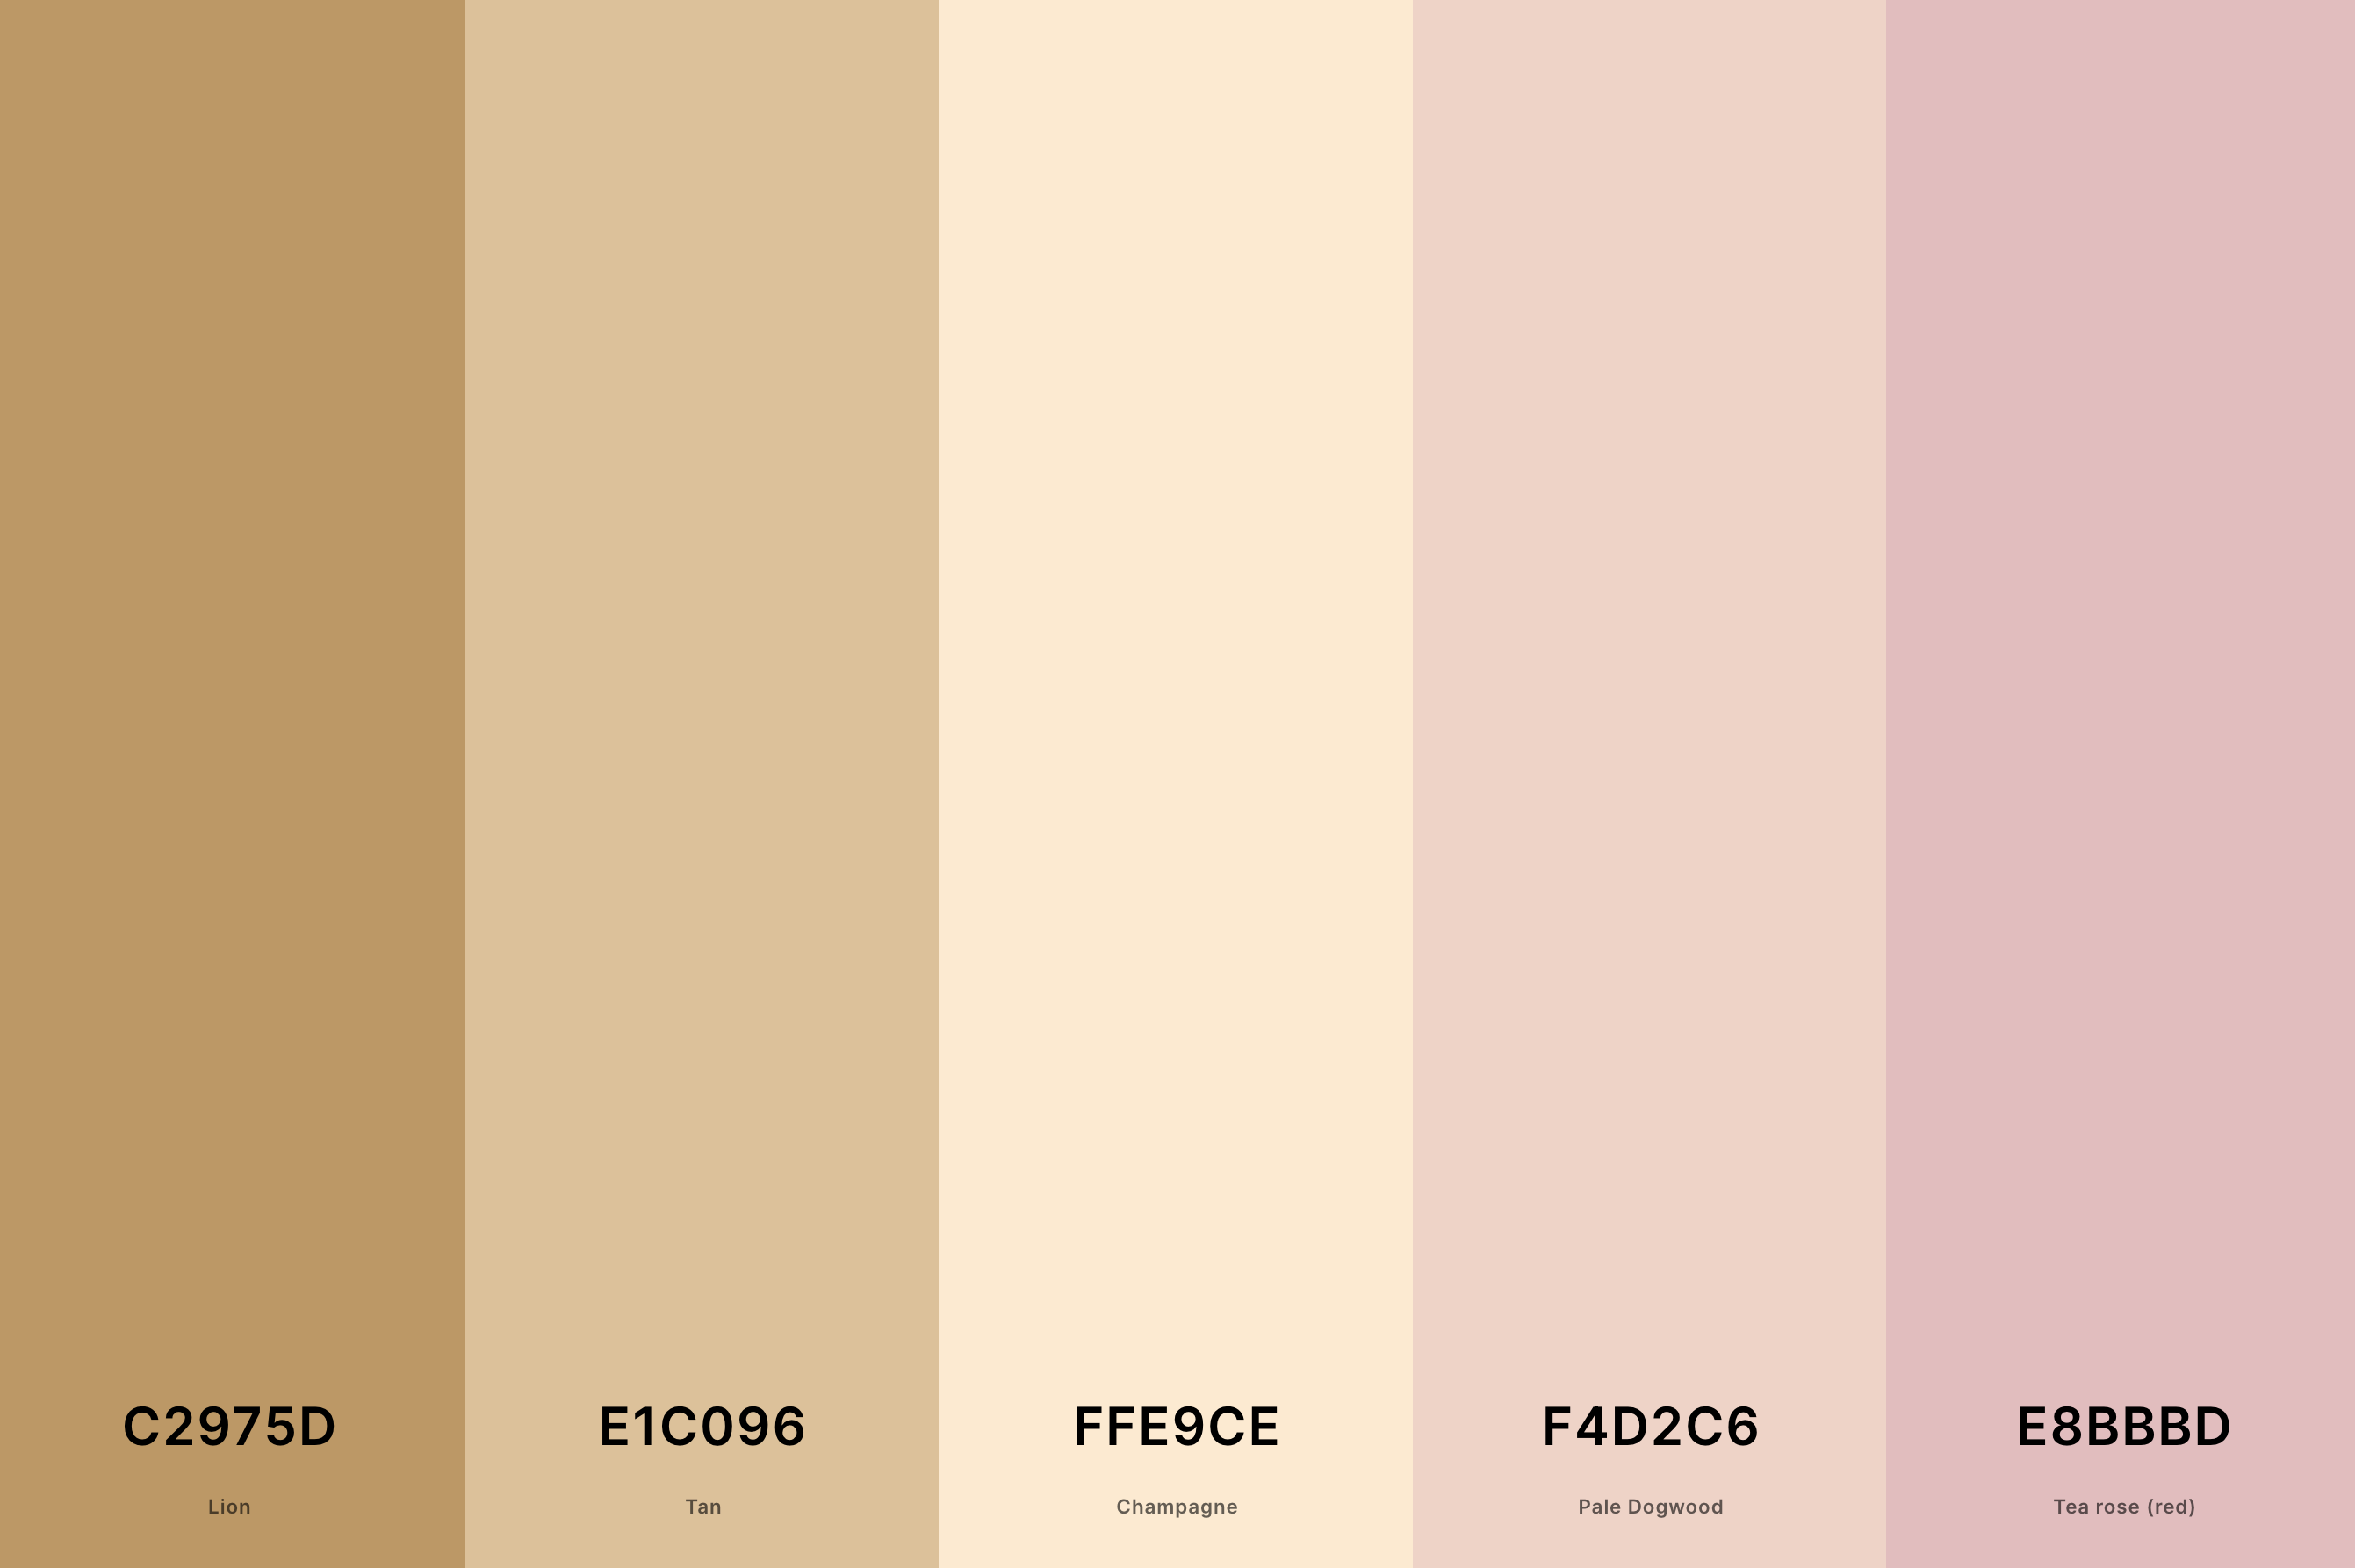 24. Rose Gold And Champagne Color Palette Color Palette with Lion (Hex #C2975D) + Tan (Hex #E1C096) + Champagne (Hex #FFE9CE) + Pale Dogwood (Hex #F4D2C6) + Tea Rose (Red) (Hex #E8BBBD) Color Palette with Hex Codes